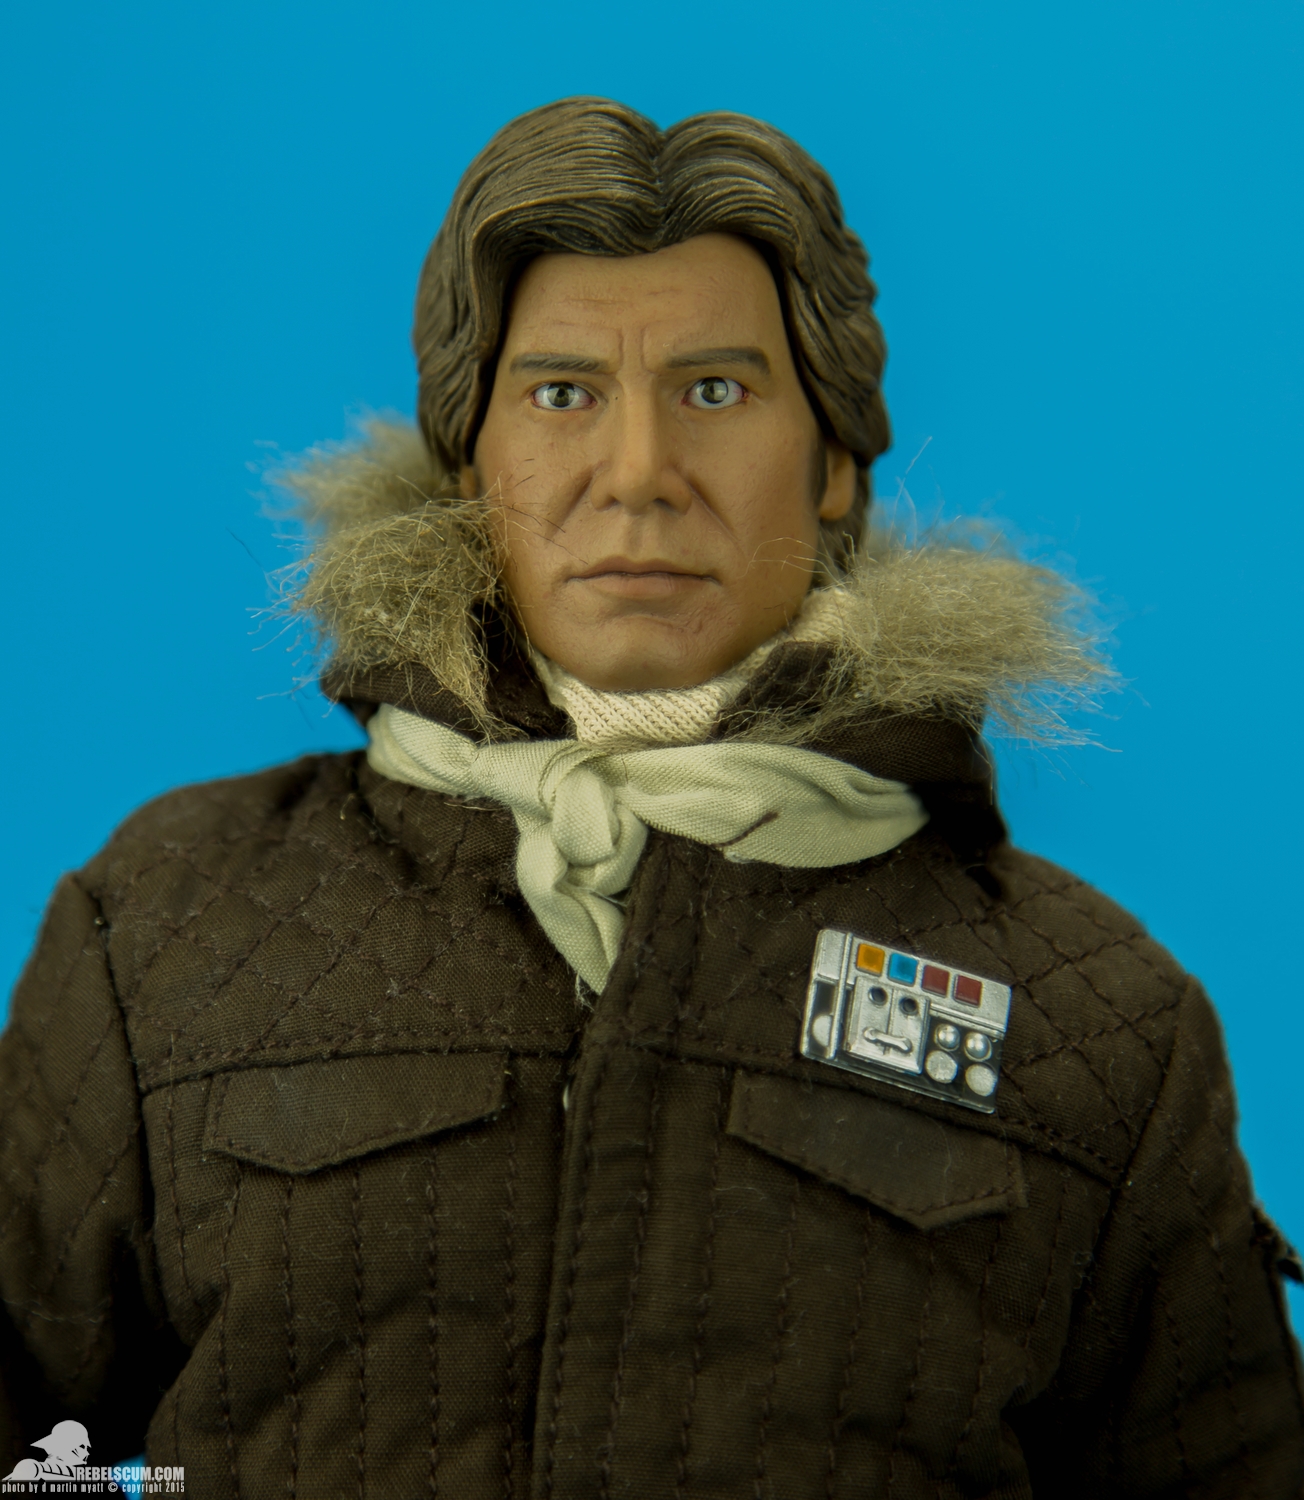 Han-Solo-Hoth-Brown-Sixth-Scale-Sideshow-Collectibles-Star-Wars-009.jpg